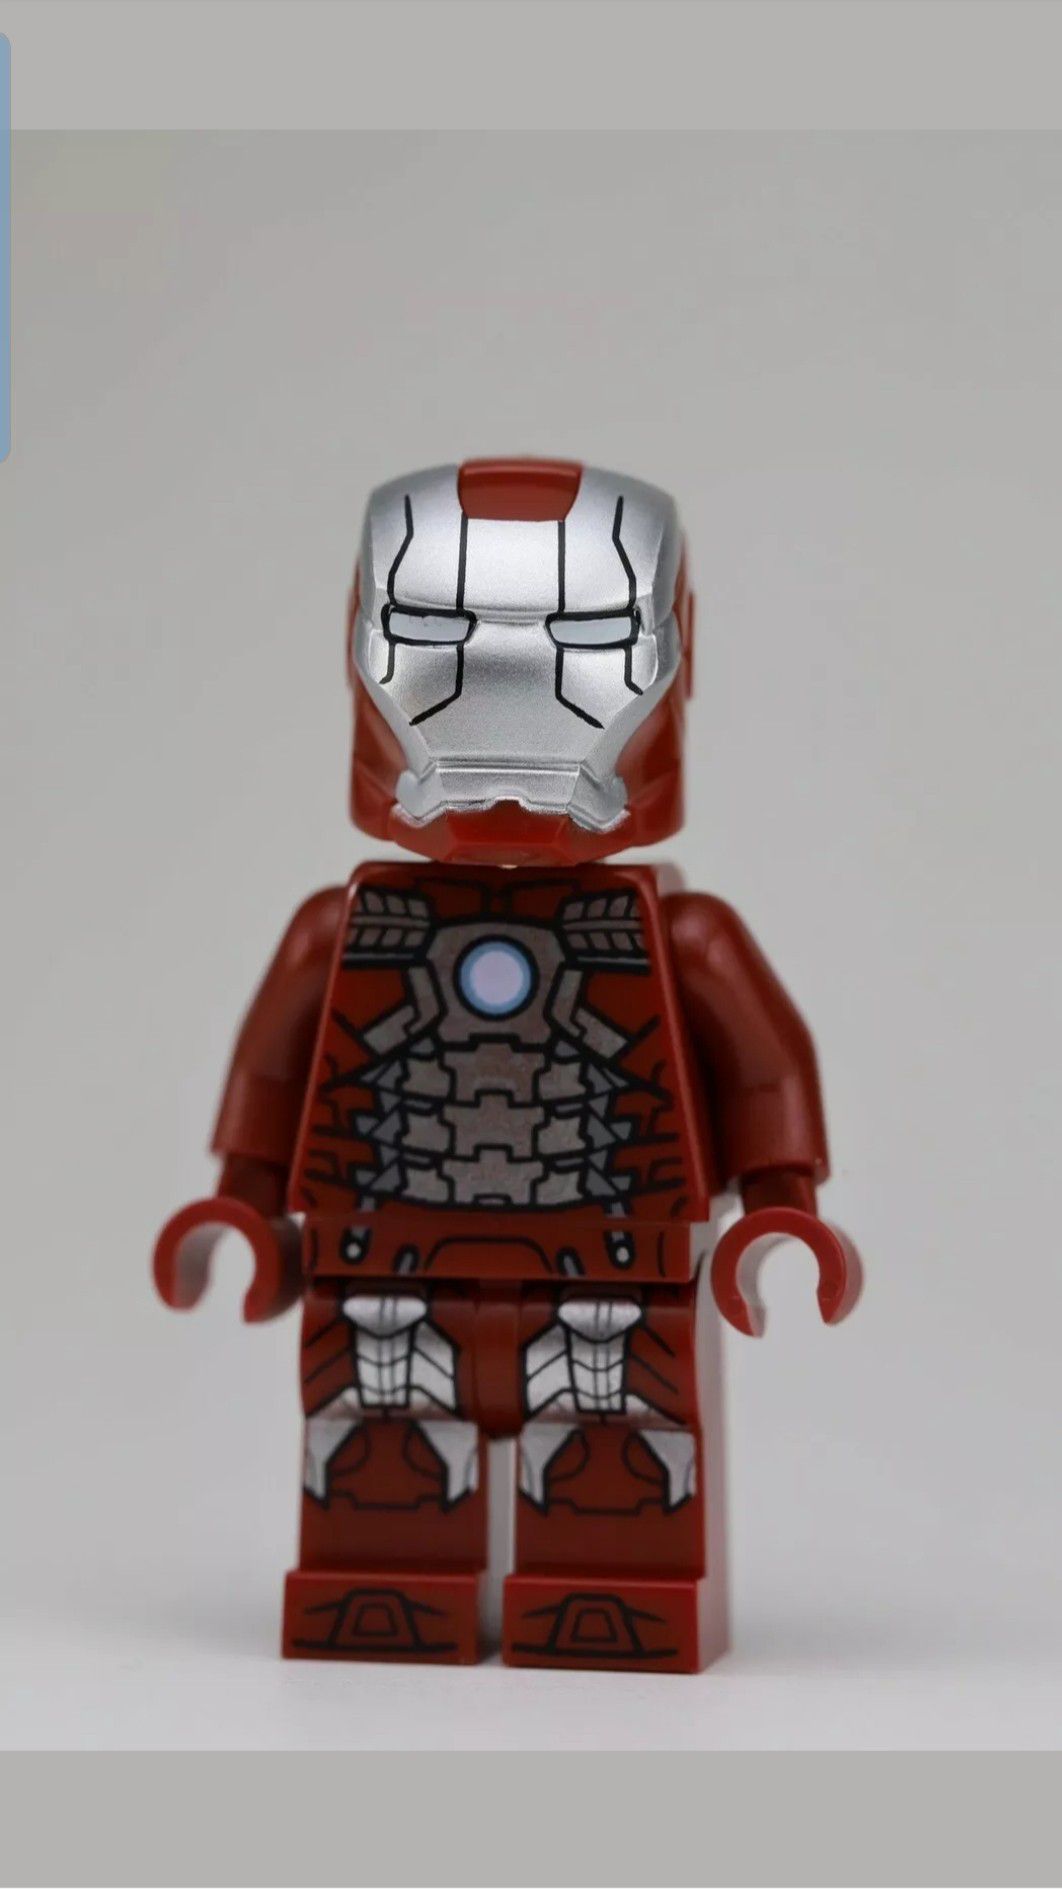 BRAND NEW LEGO MARVEL - Iron Man Suit Mark 5 - Condition is New.